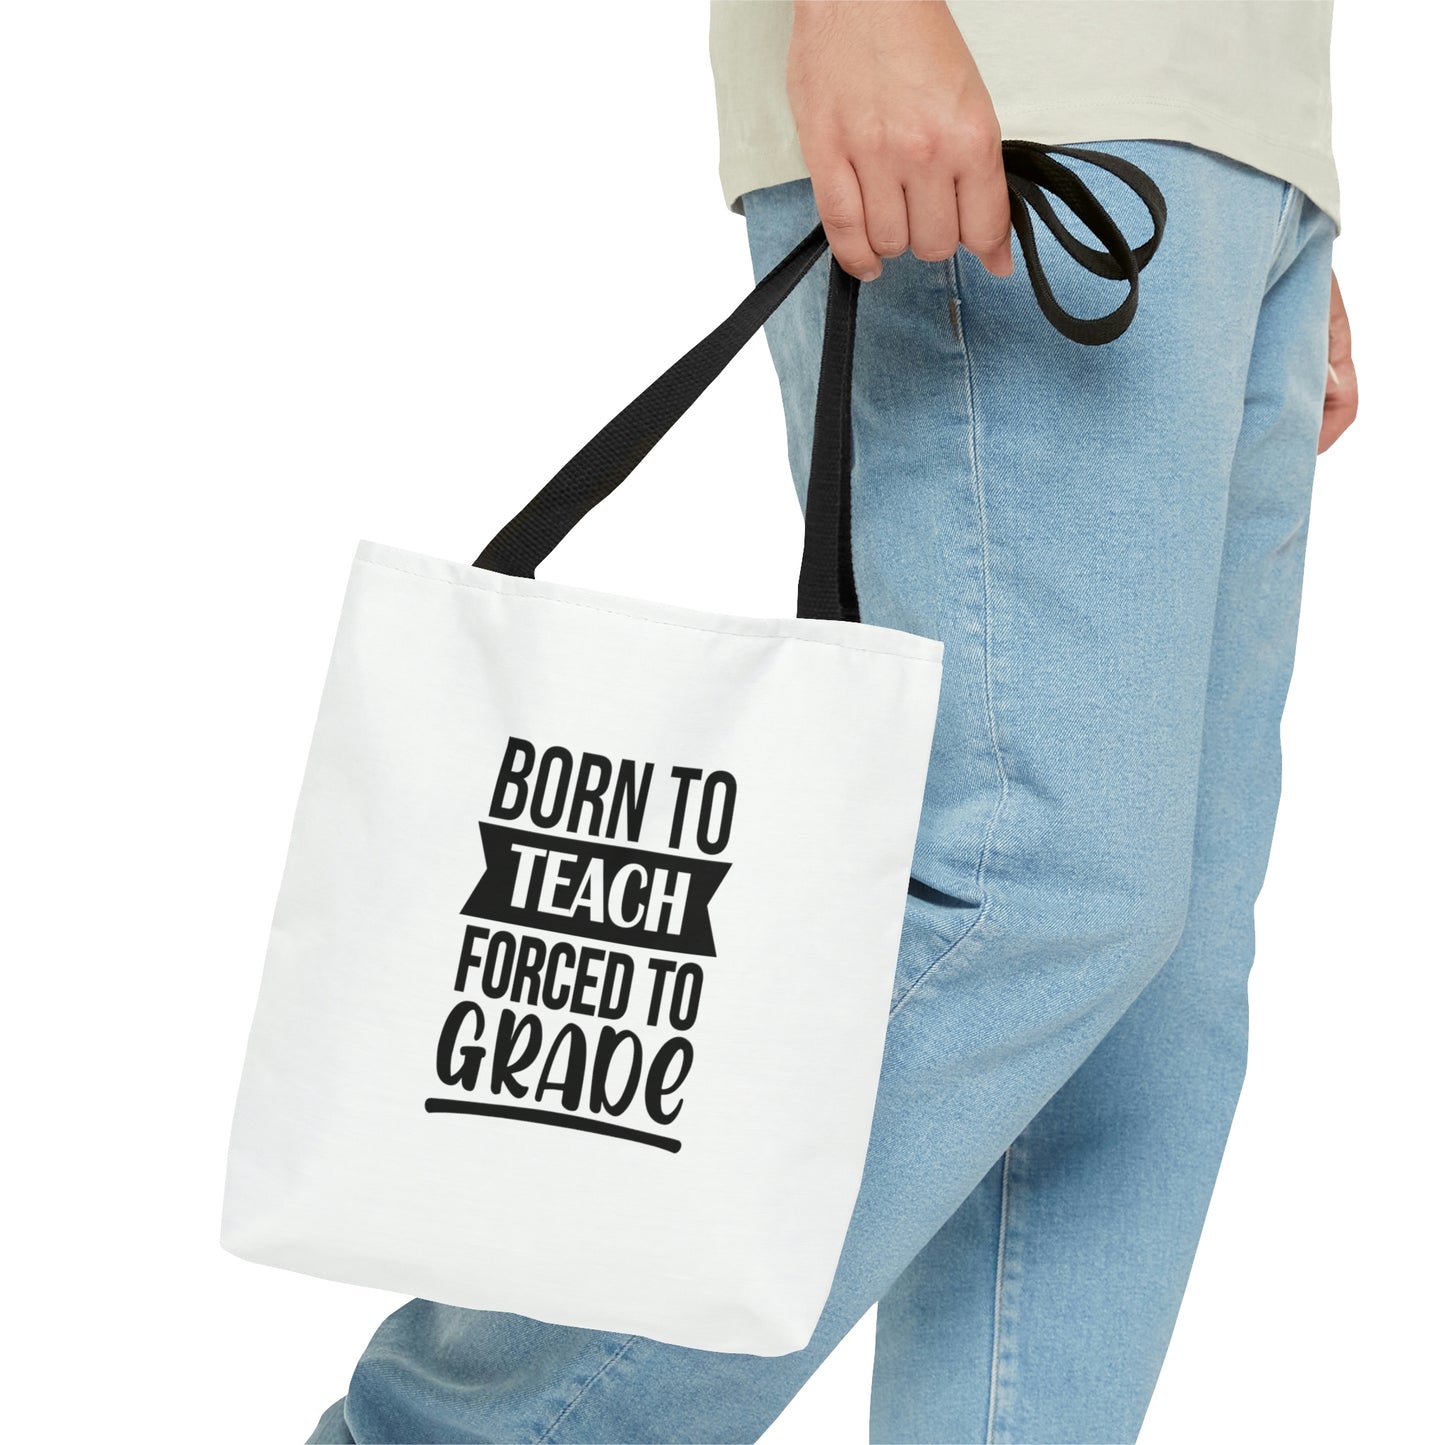 "Born to teach, forced to grade" Tote Bag !